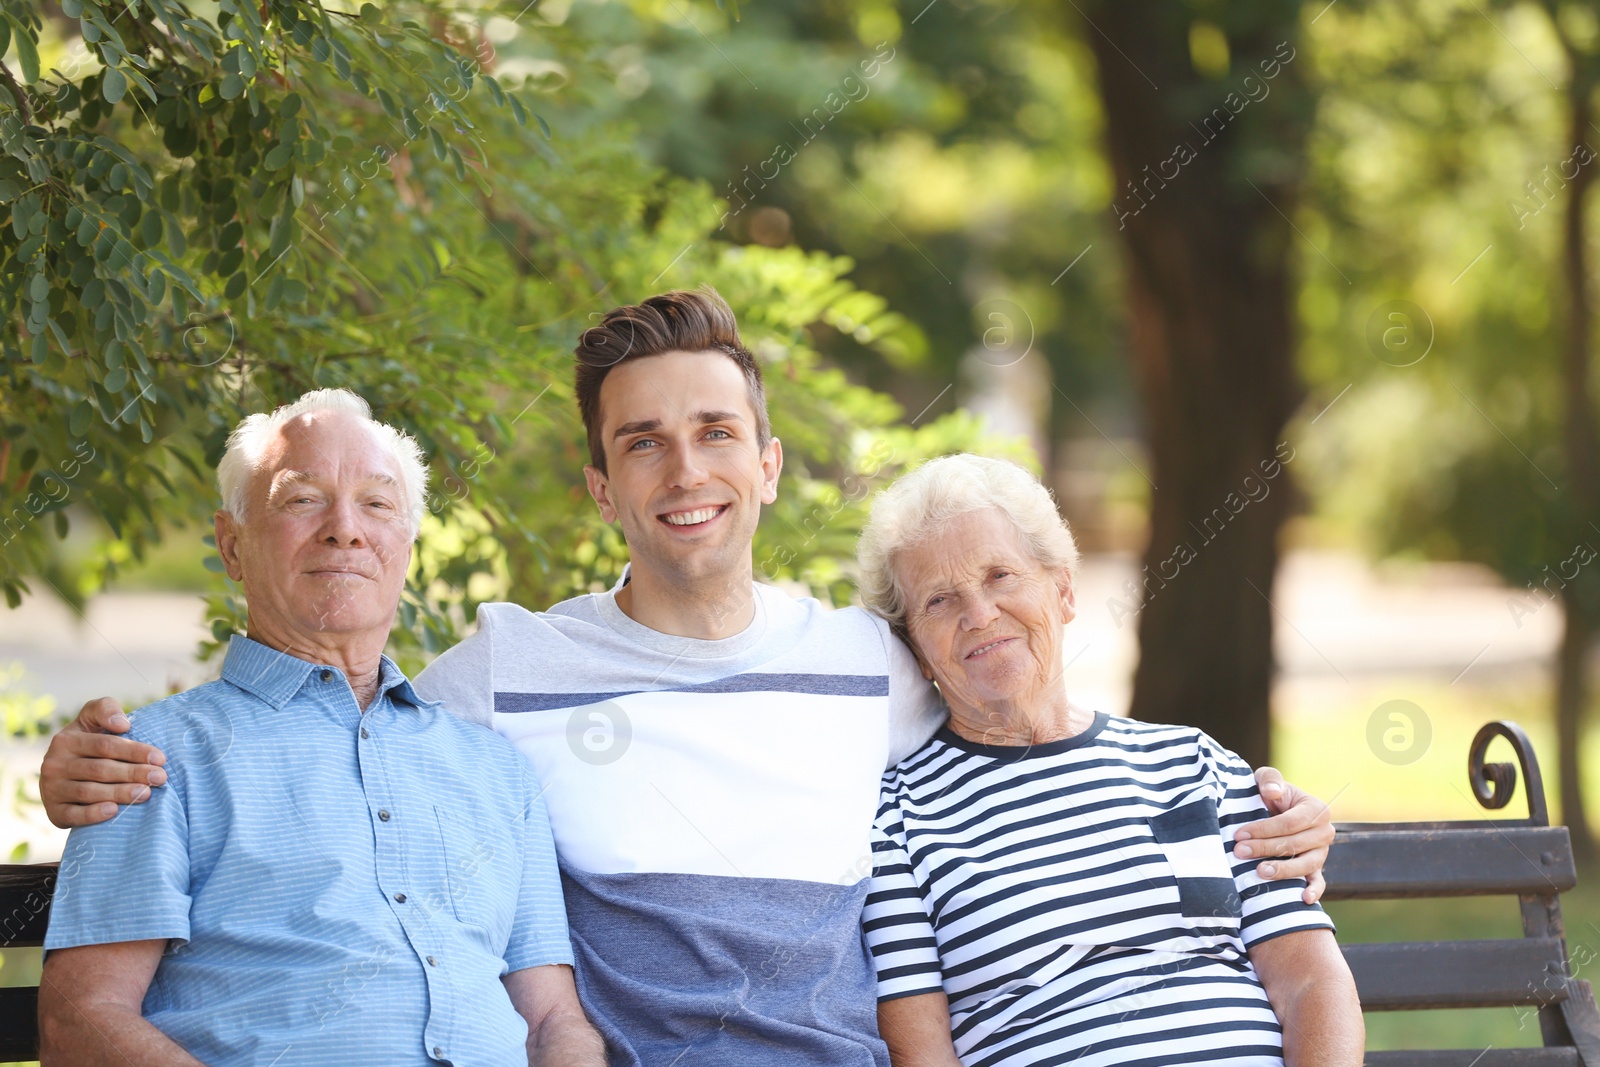 Photo of Man with elderly parents on bench in park